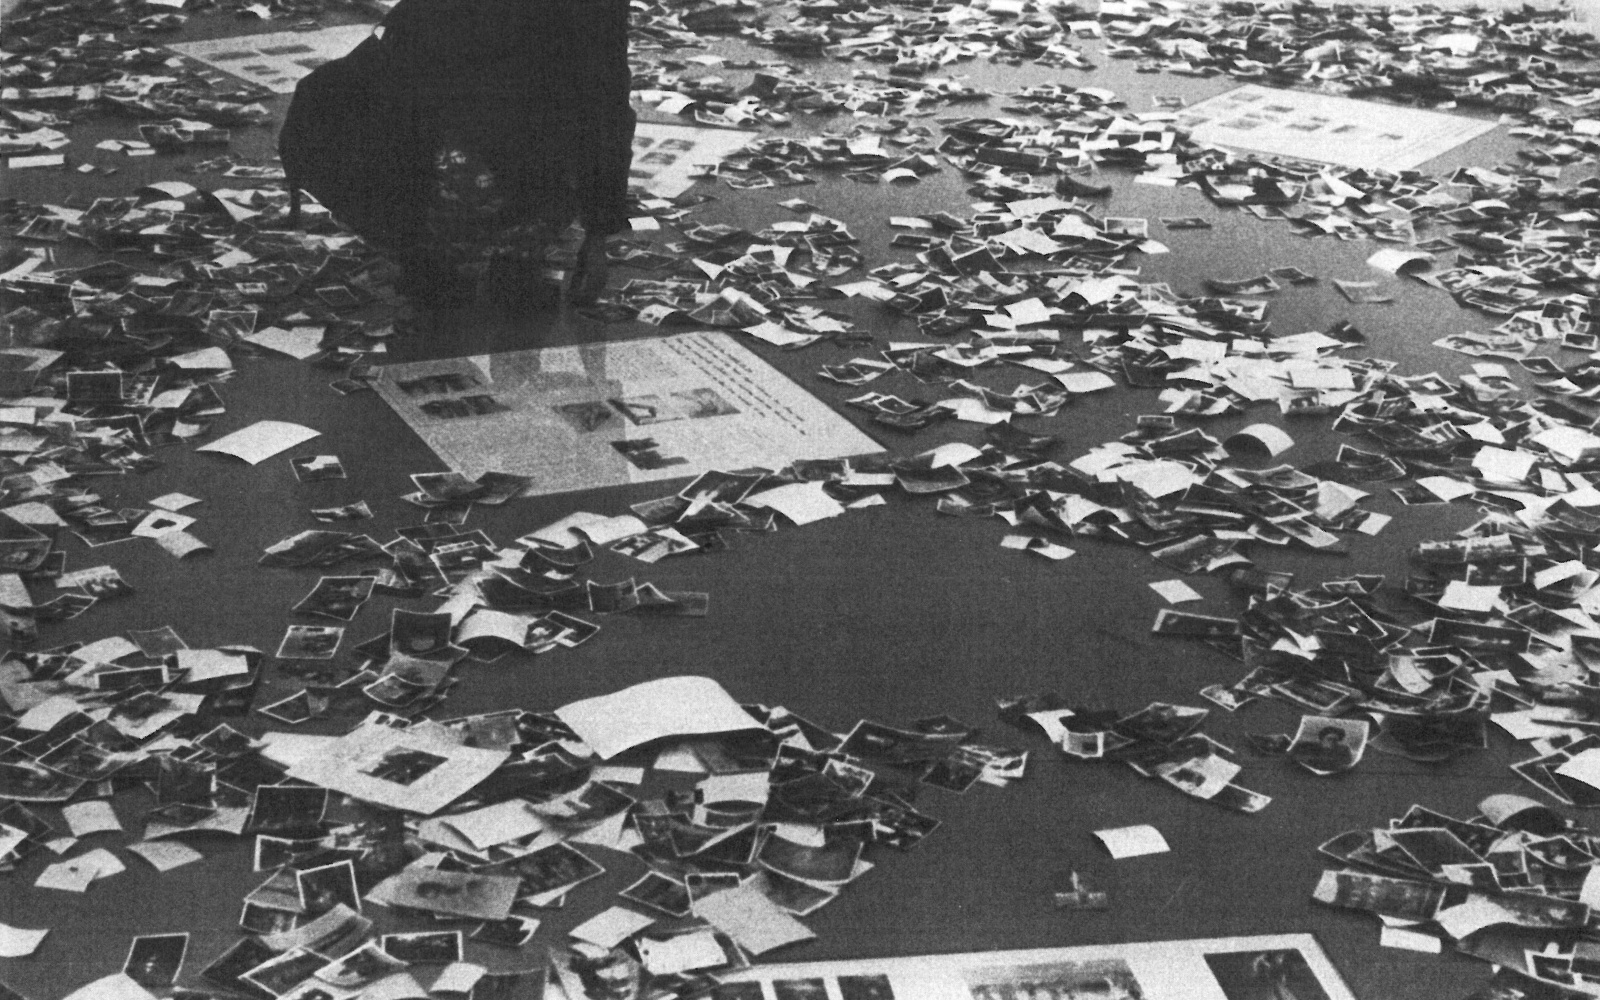 The black and white photography shows many photos scattered on the ground.